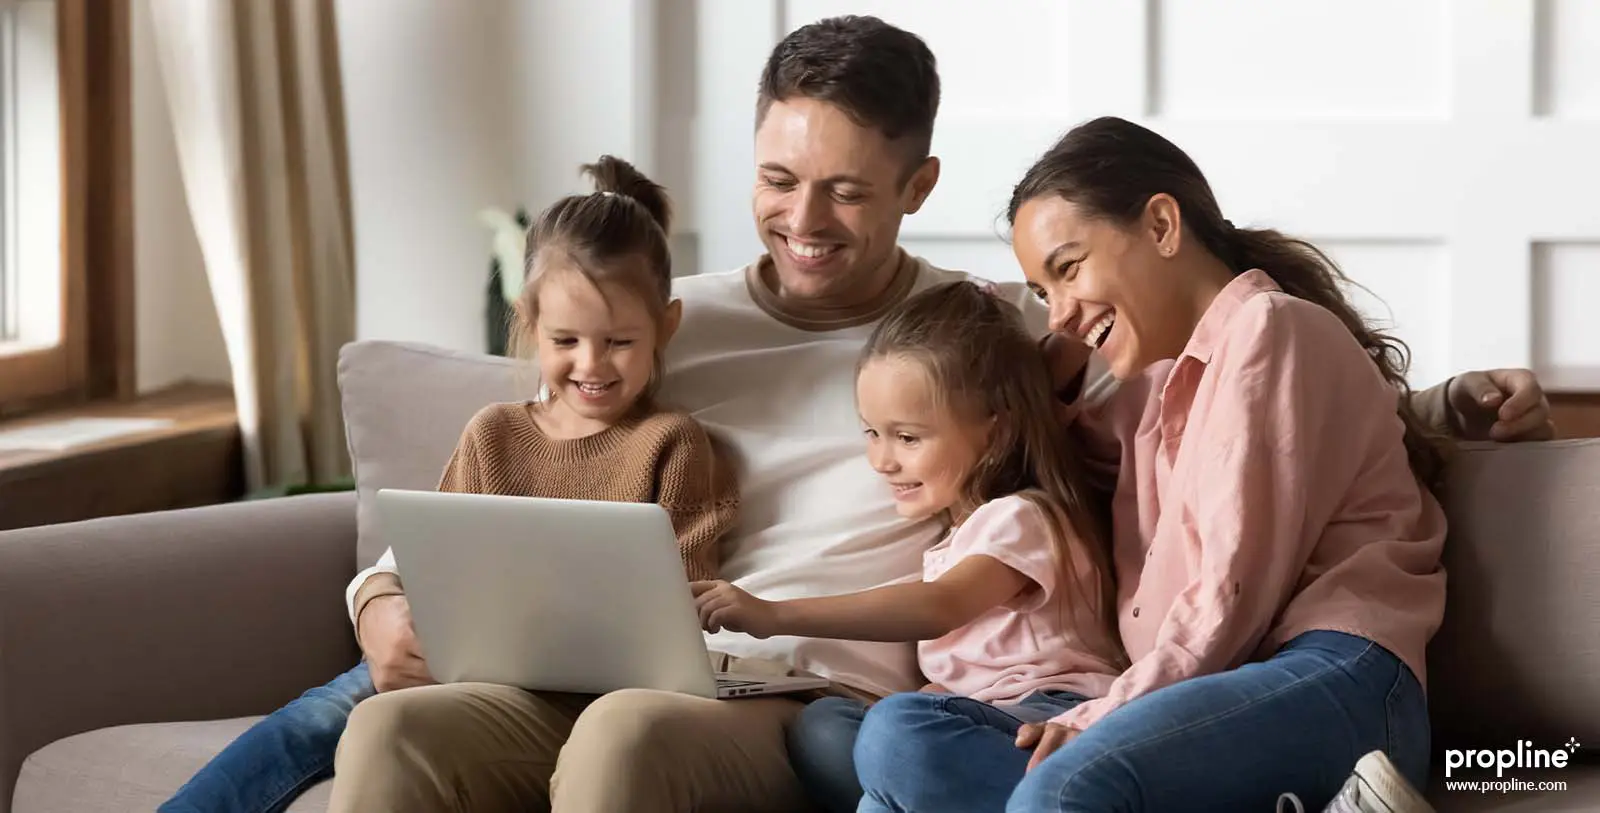 A family visiting an engaging property website